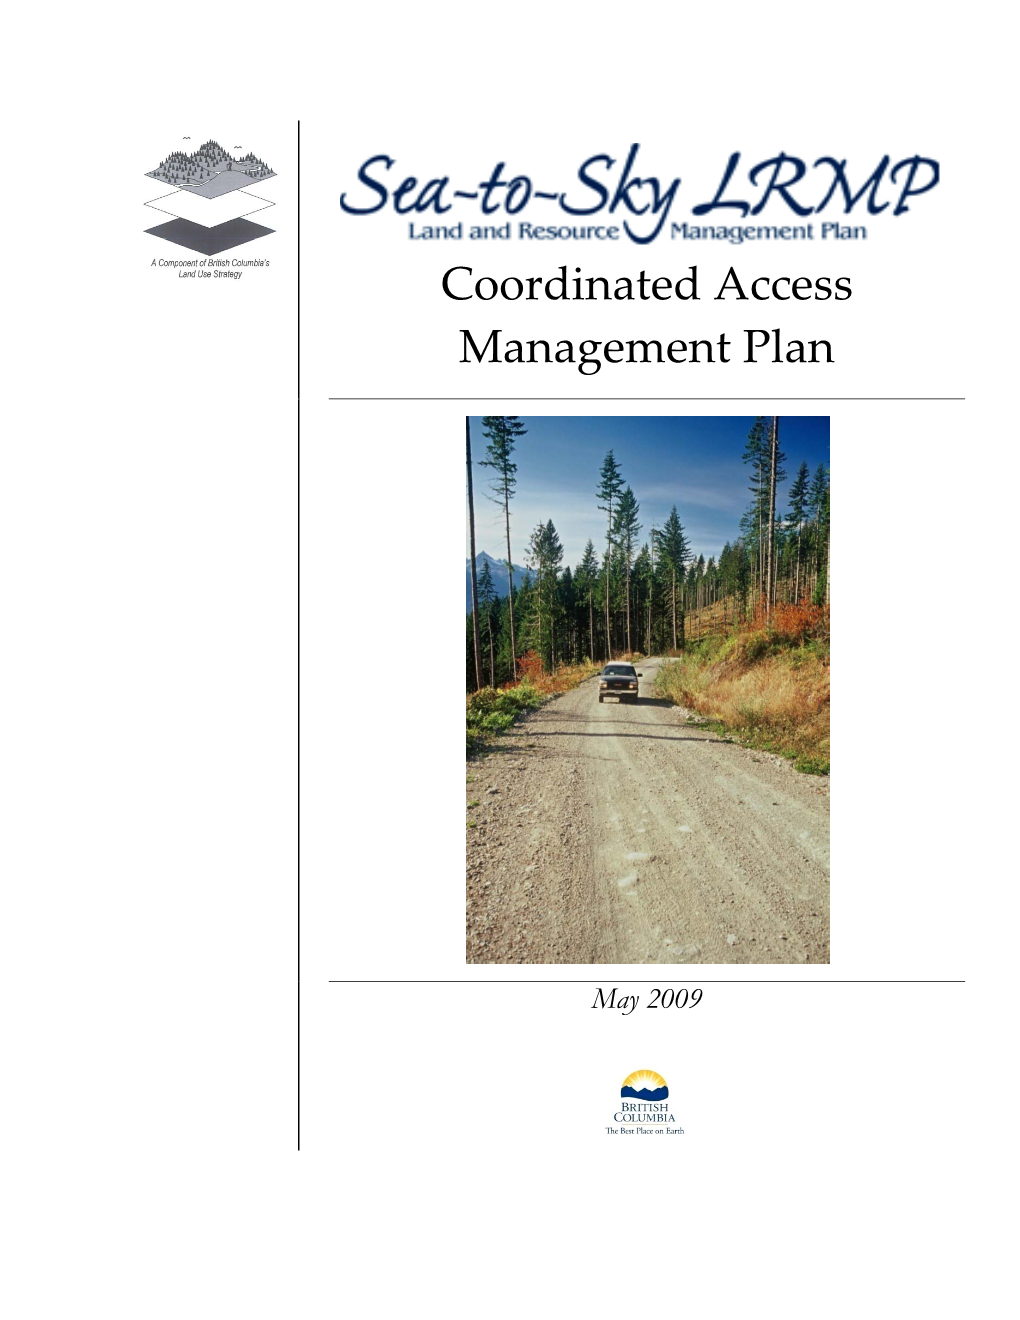 Sea to Sky LRMP Coordinated Access Management